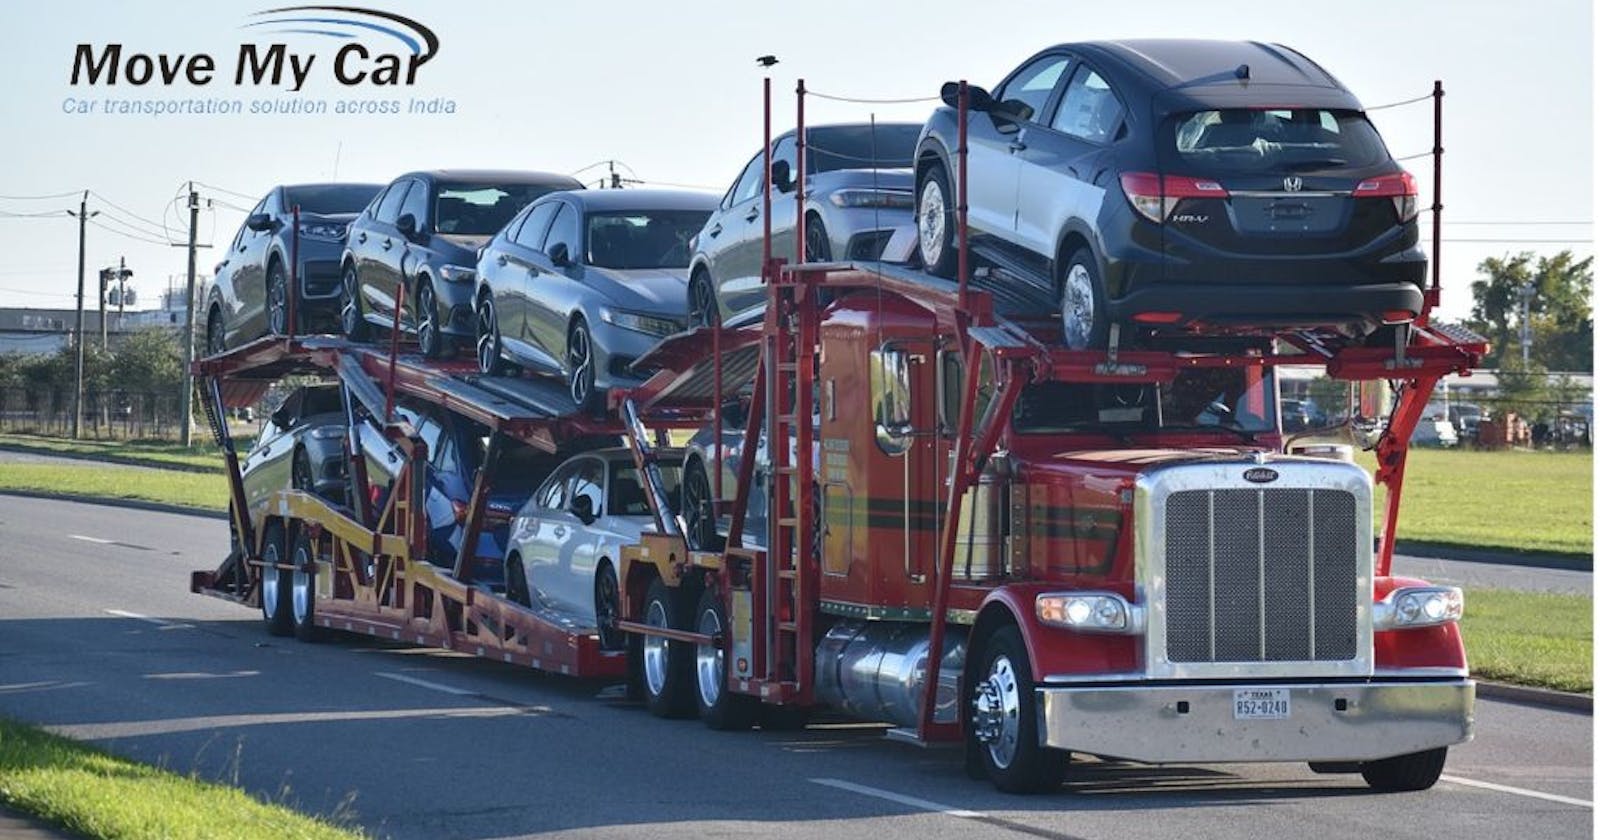 Car packers and movers tackle challenges to provide reliable car transportation services in India